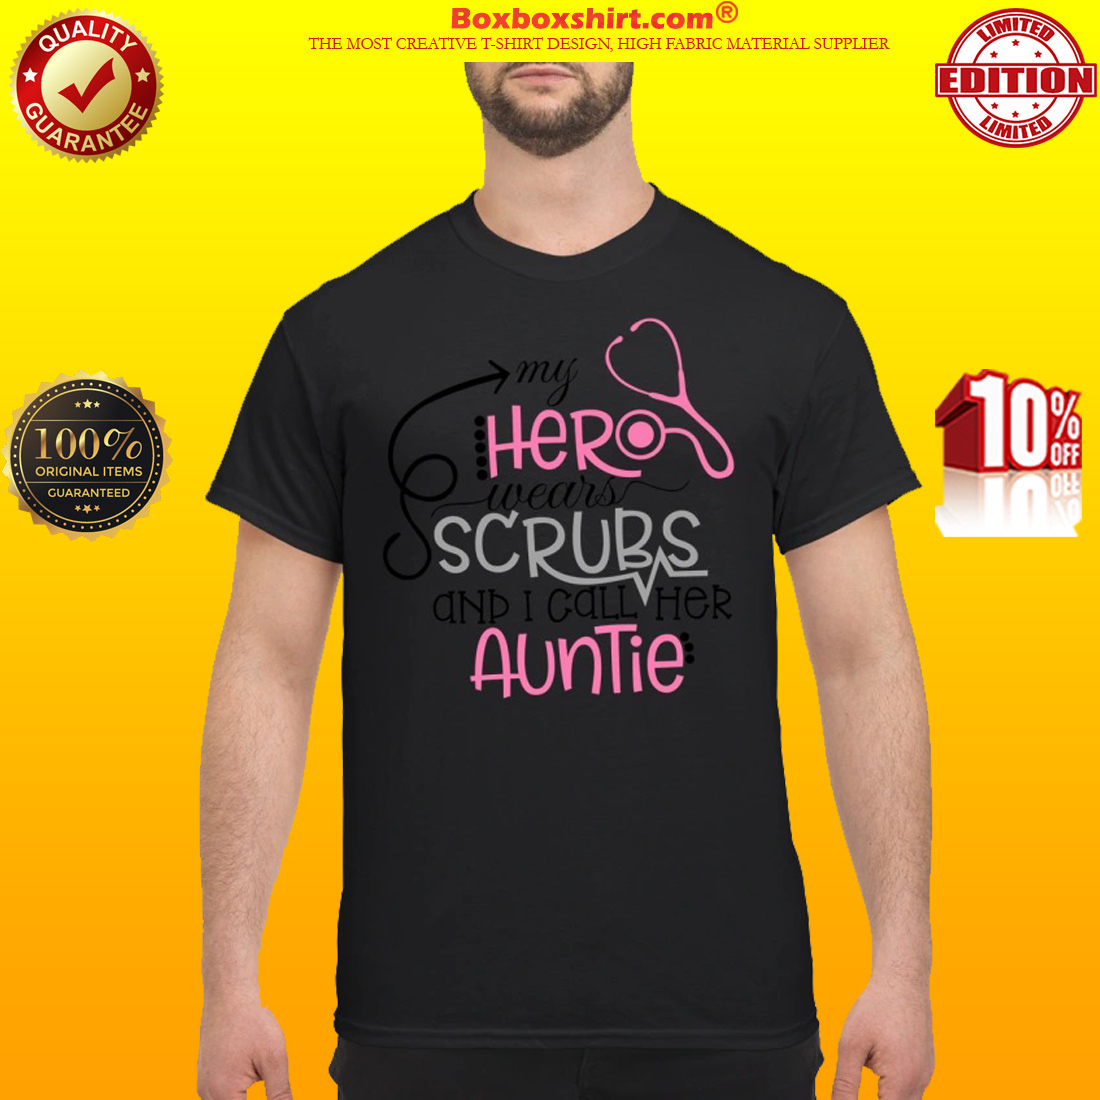 My heroes wears scrubs and I call her auntie classic shirt